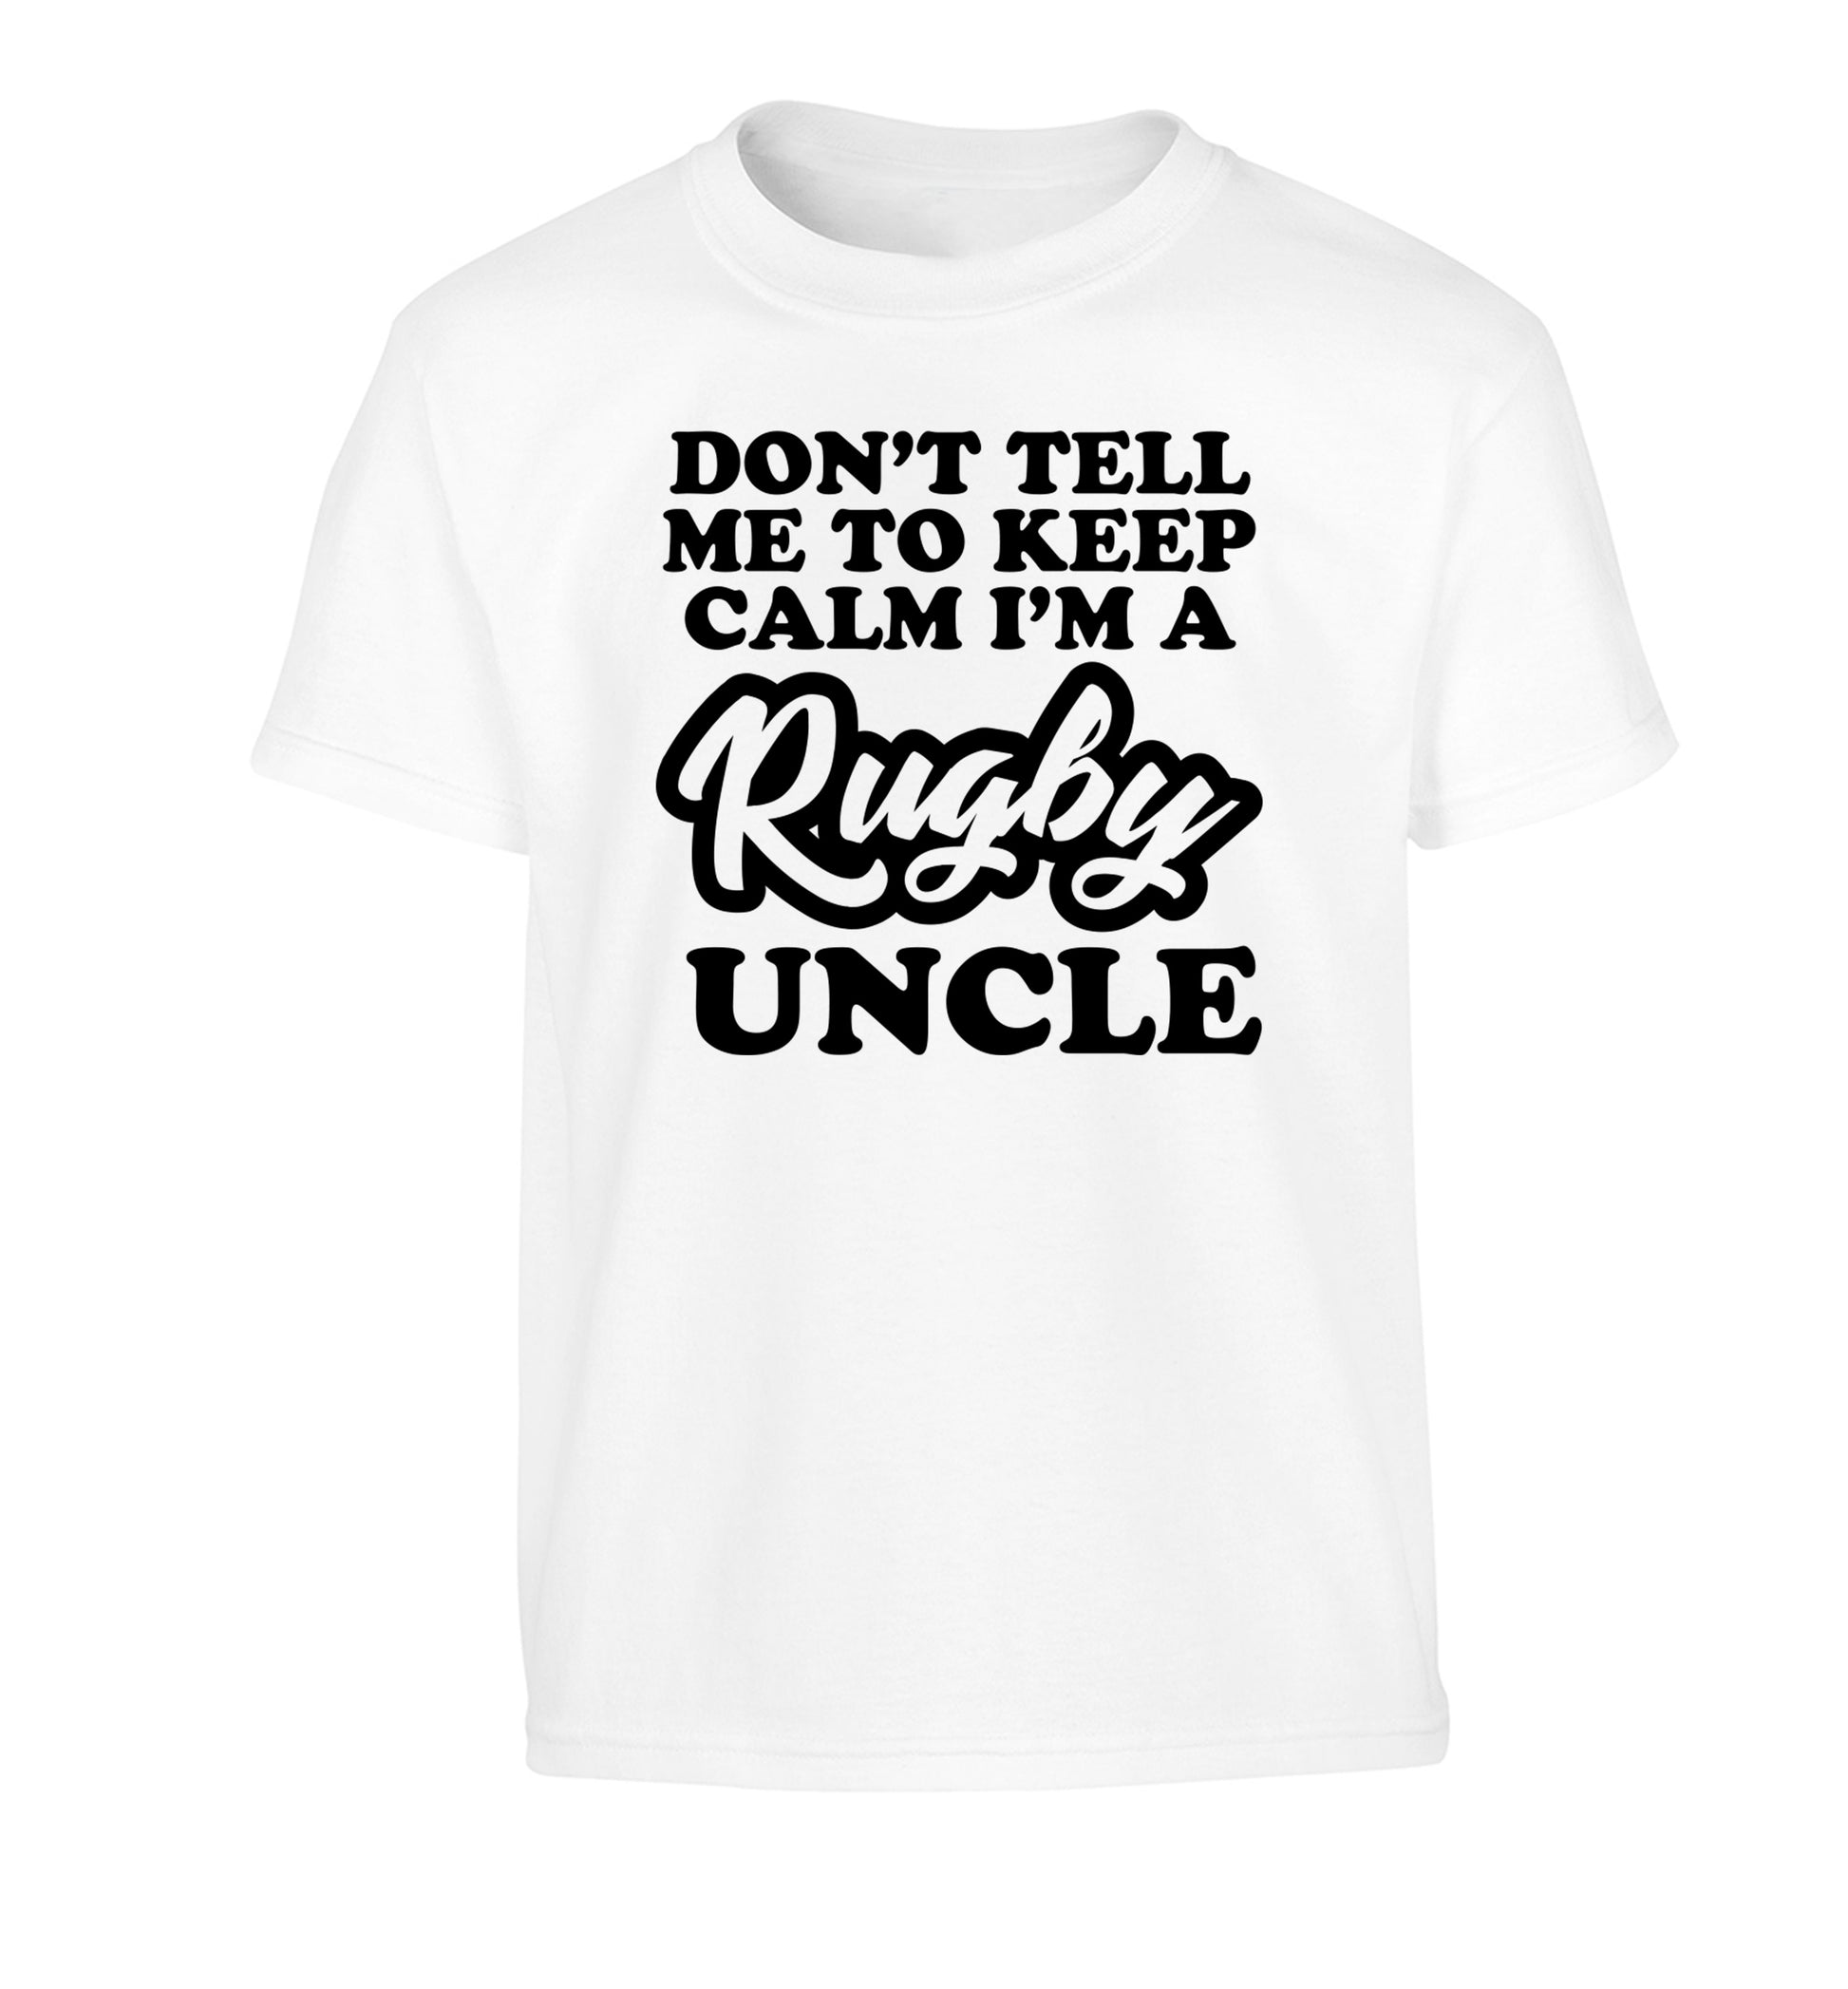 Don't tell me to keep calm I'm a rugby uncle Children's white Tshirt 12-13 Years